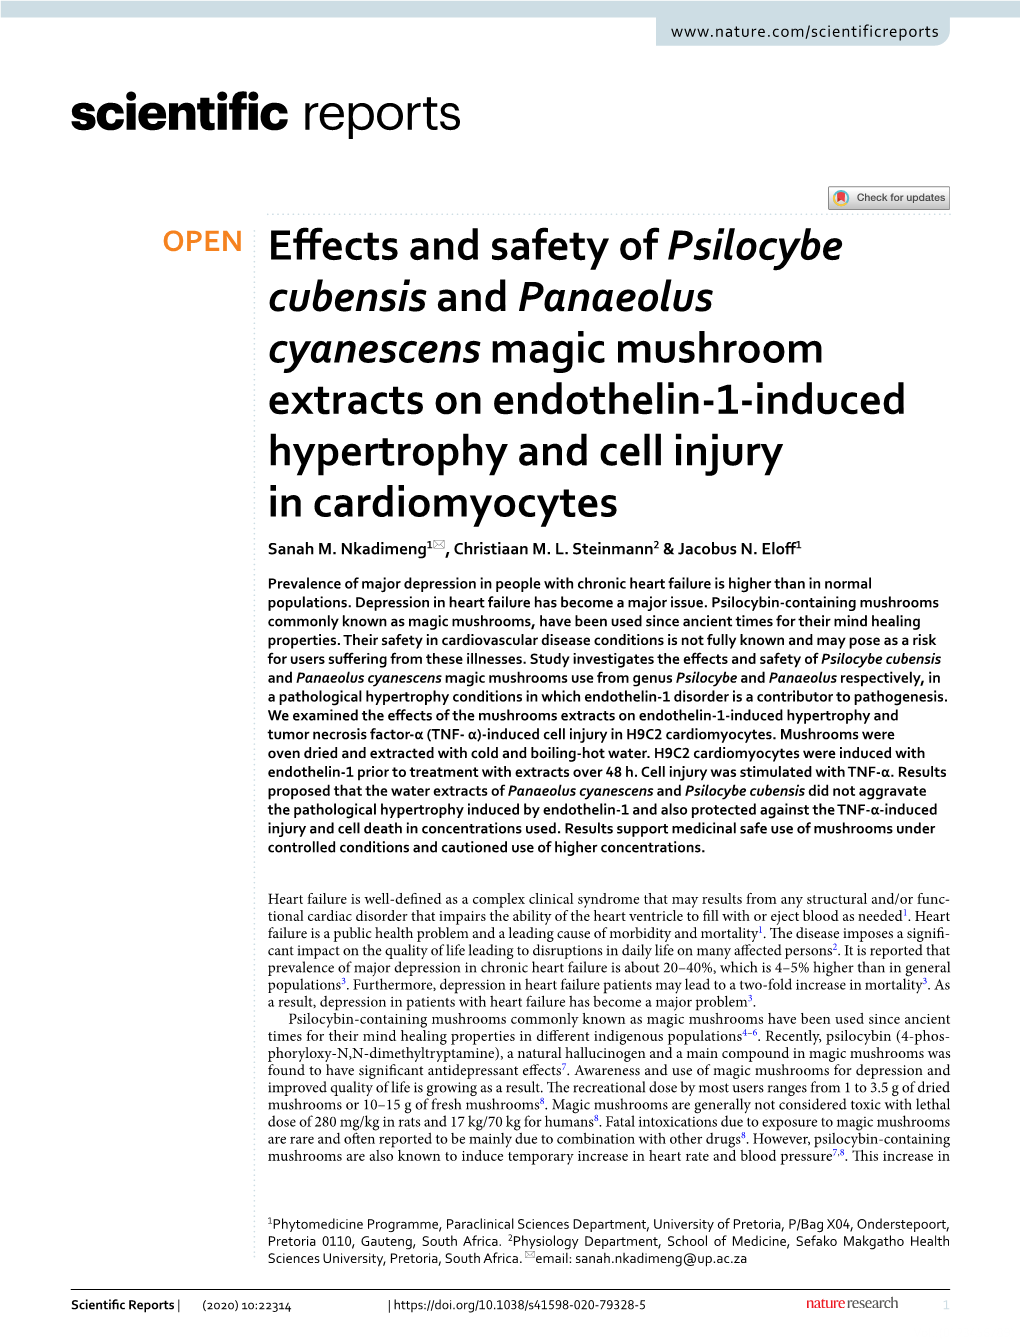 Effects and Safety of Psilocybe Cubensis and Panaeolus